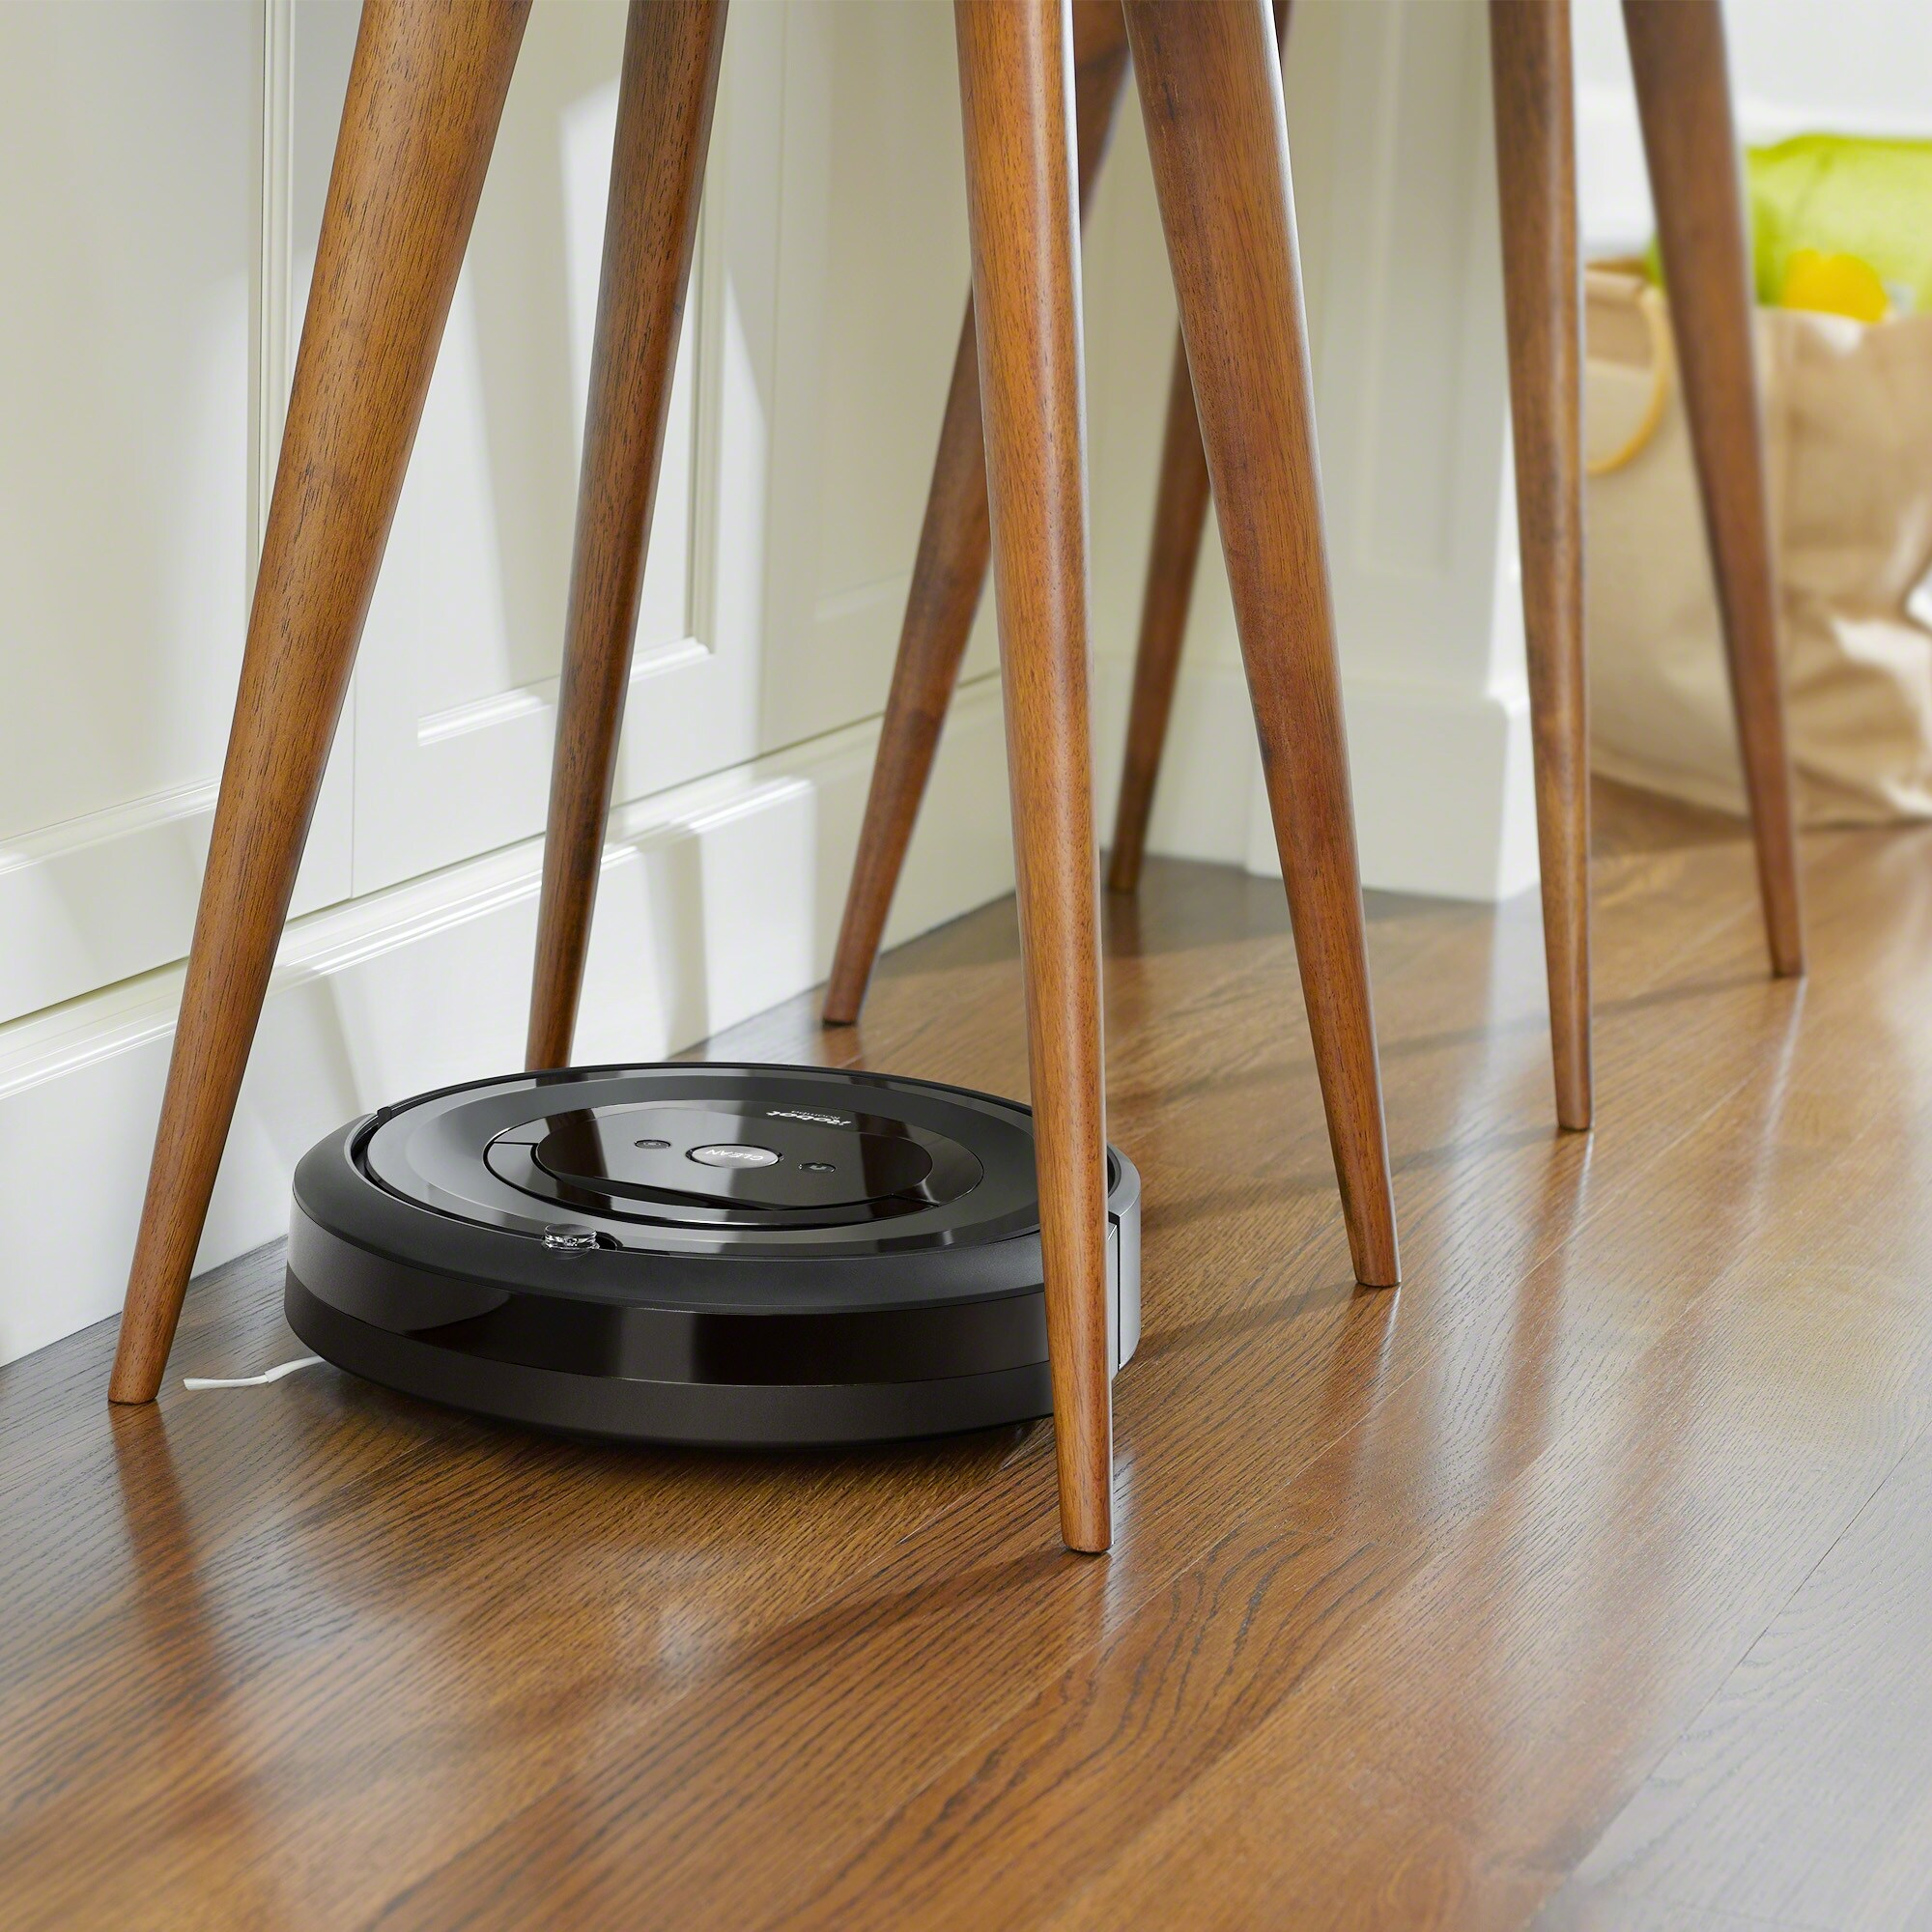 iRobot Roomba E5 (5150) Robot Vacuum - Wi-Fi Connected, Works with Alexa,  Ideal for Pet Hair, Carpets, Hard, Self-Charging Robotic Vacuum, Black